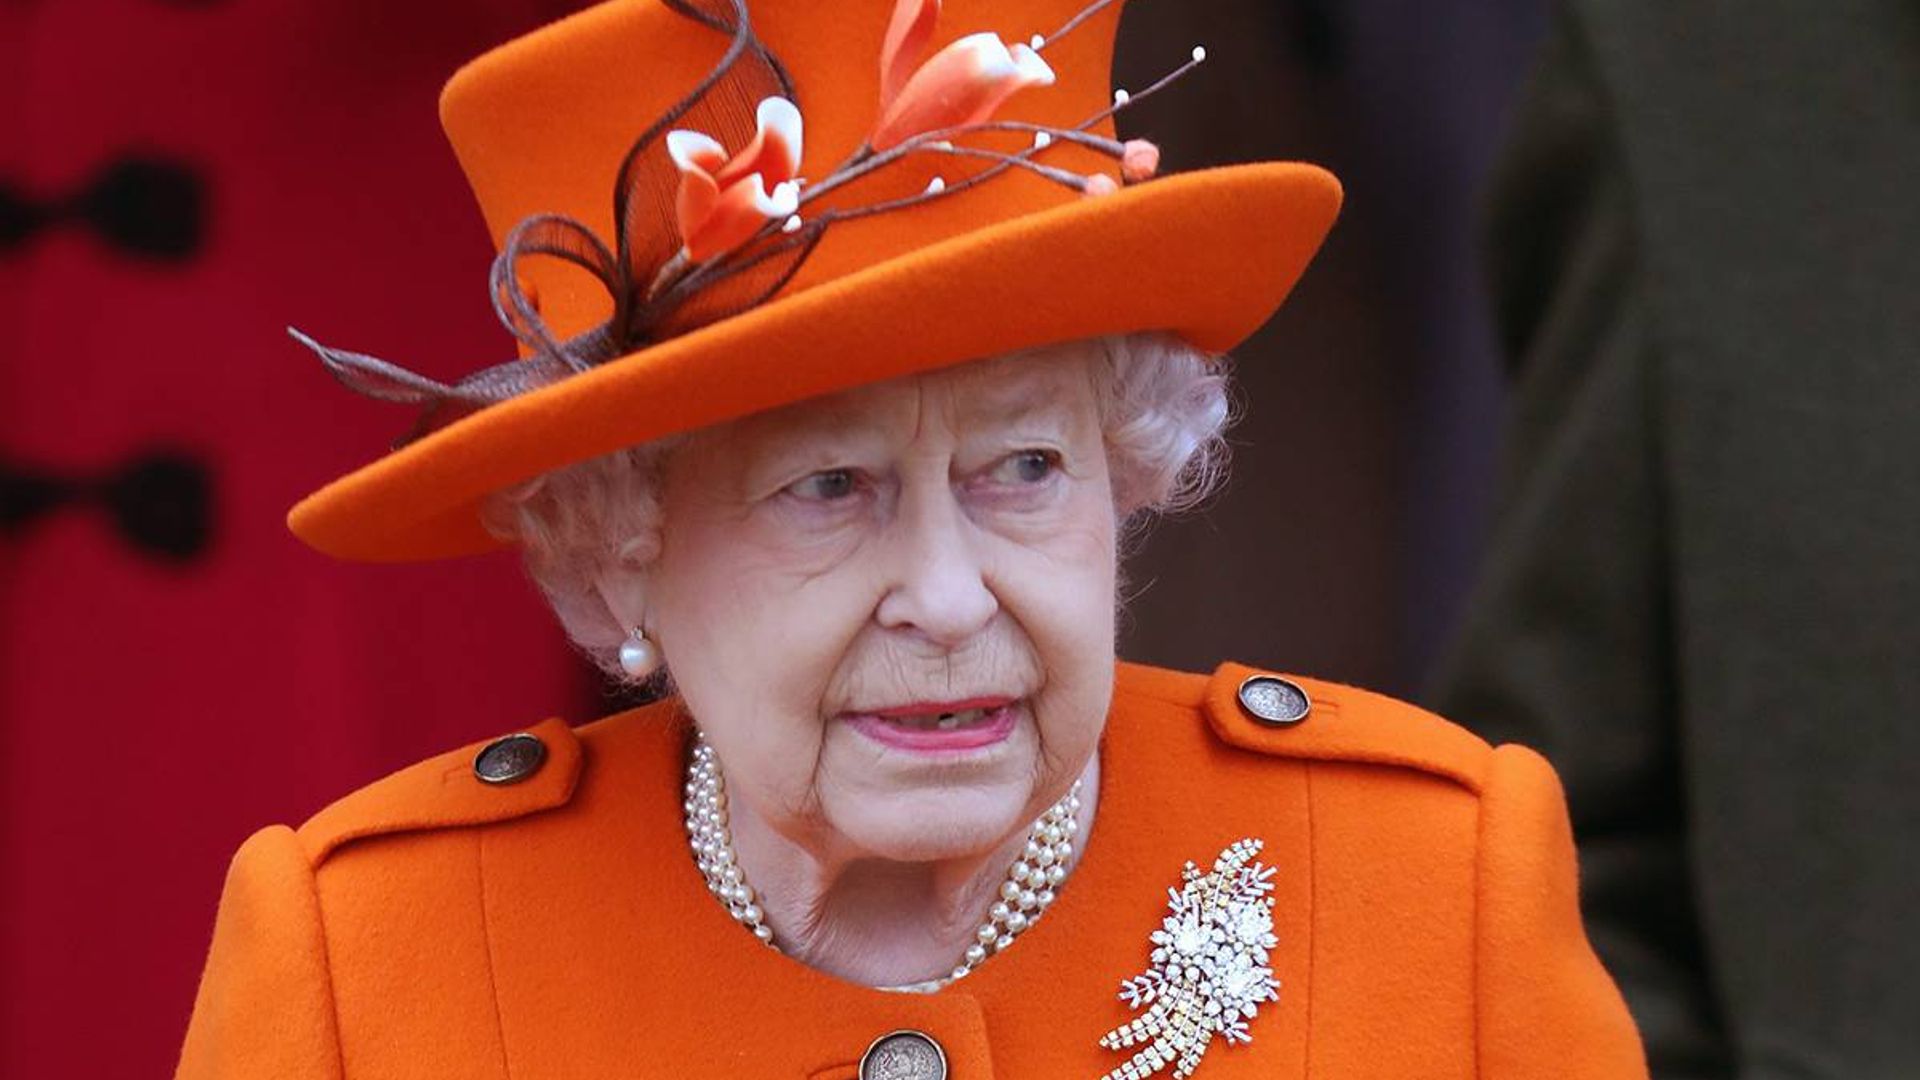 The Queen tests positive for Covid - all the details